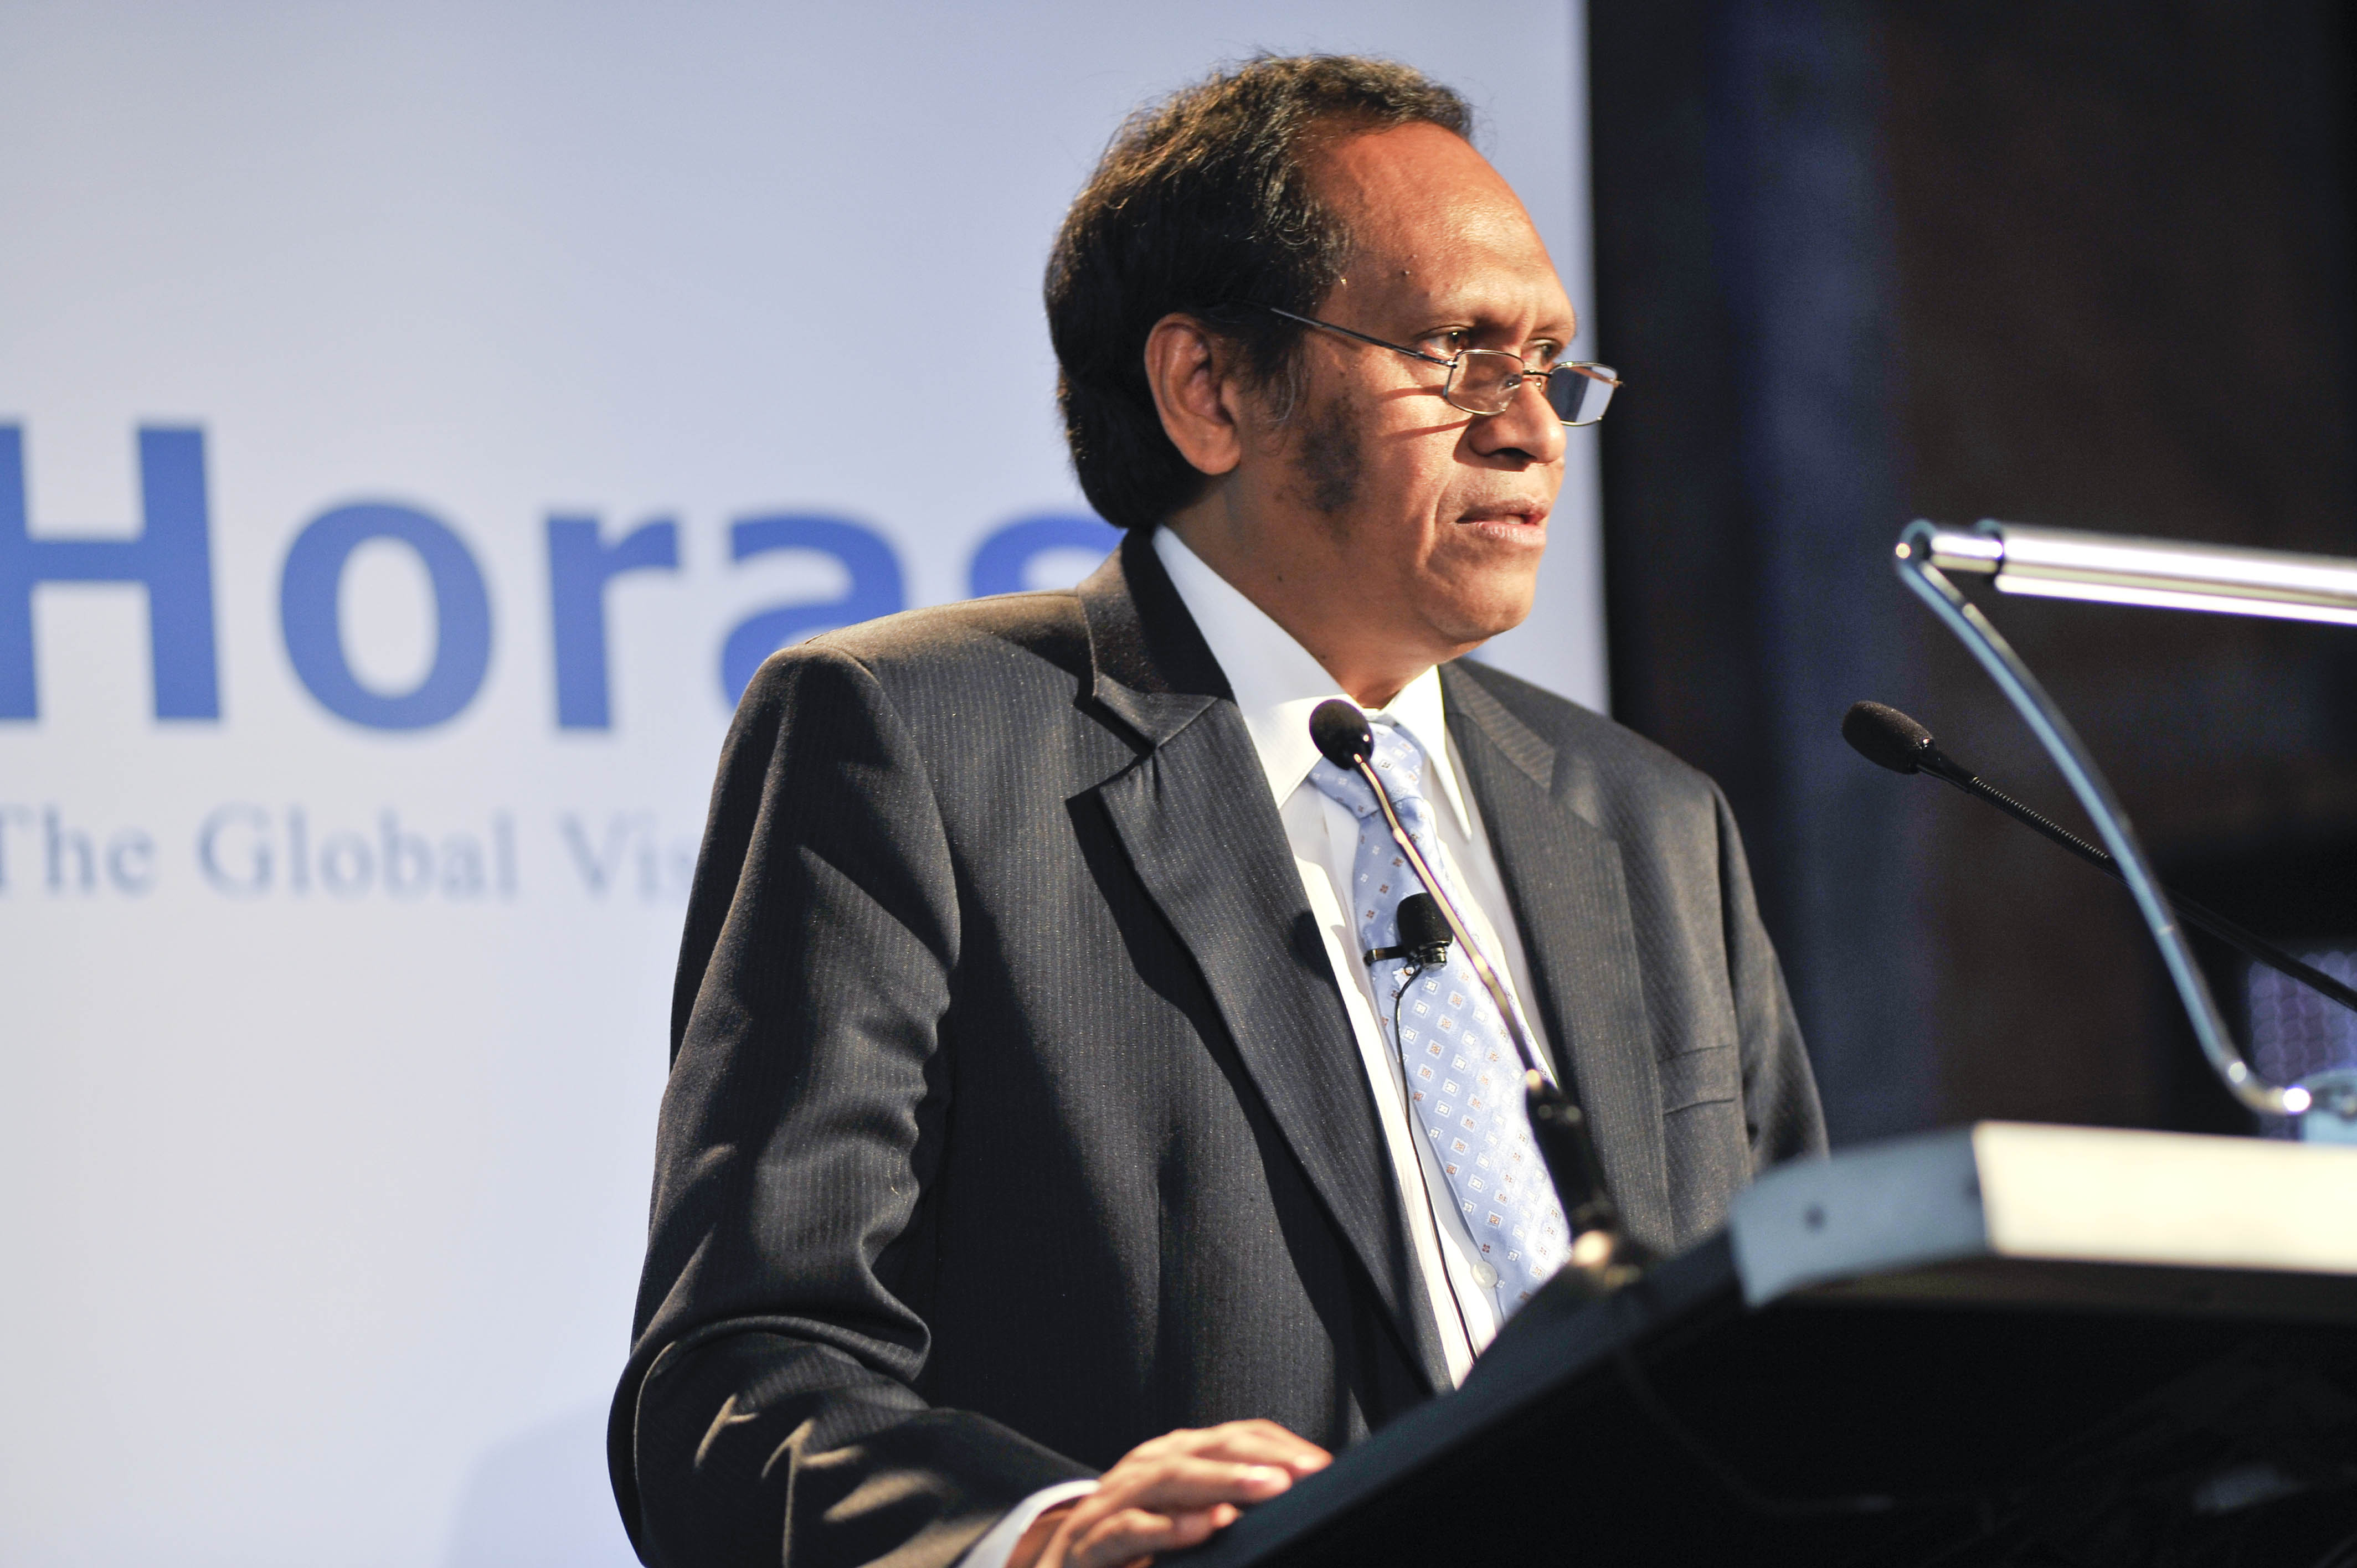 Jose Luis Guterres, Deputy Prime Minister of Timor Leste, addressing participants, at the Horasis Global China Business Meeting 2009 - Flickr - Horasis